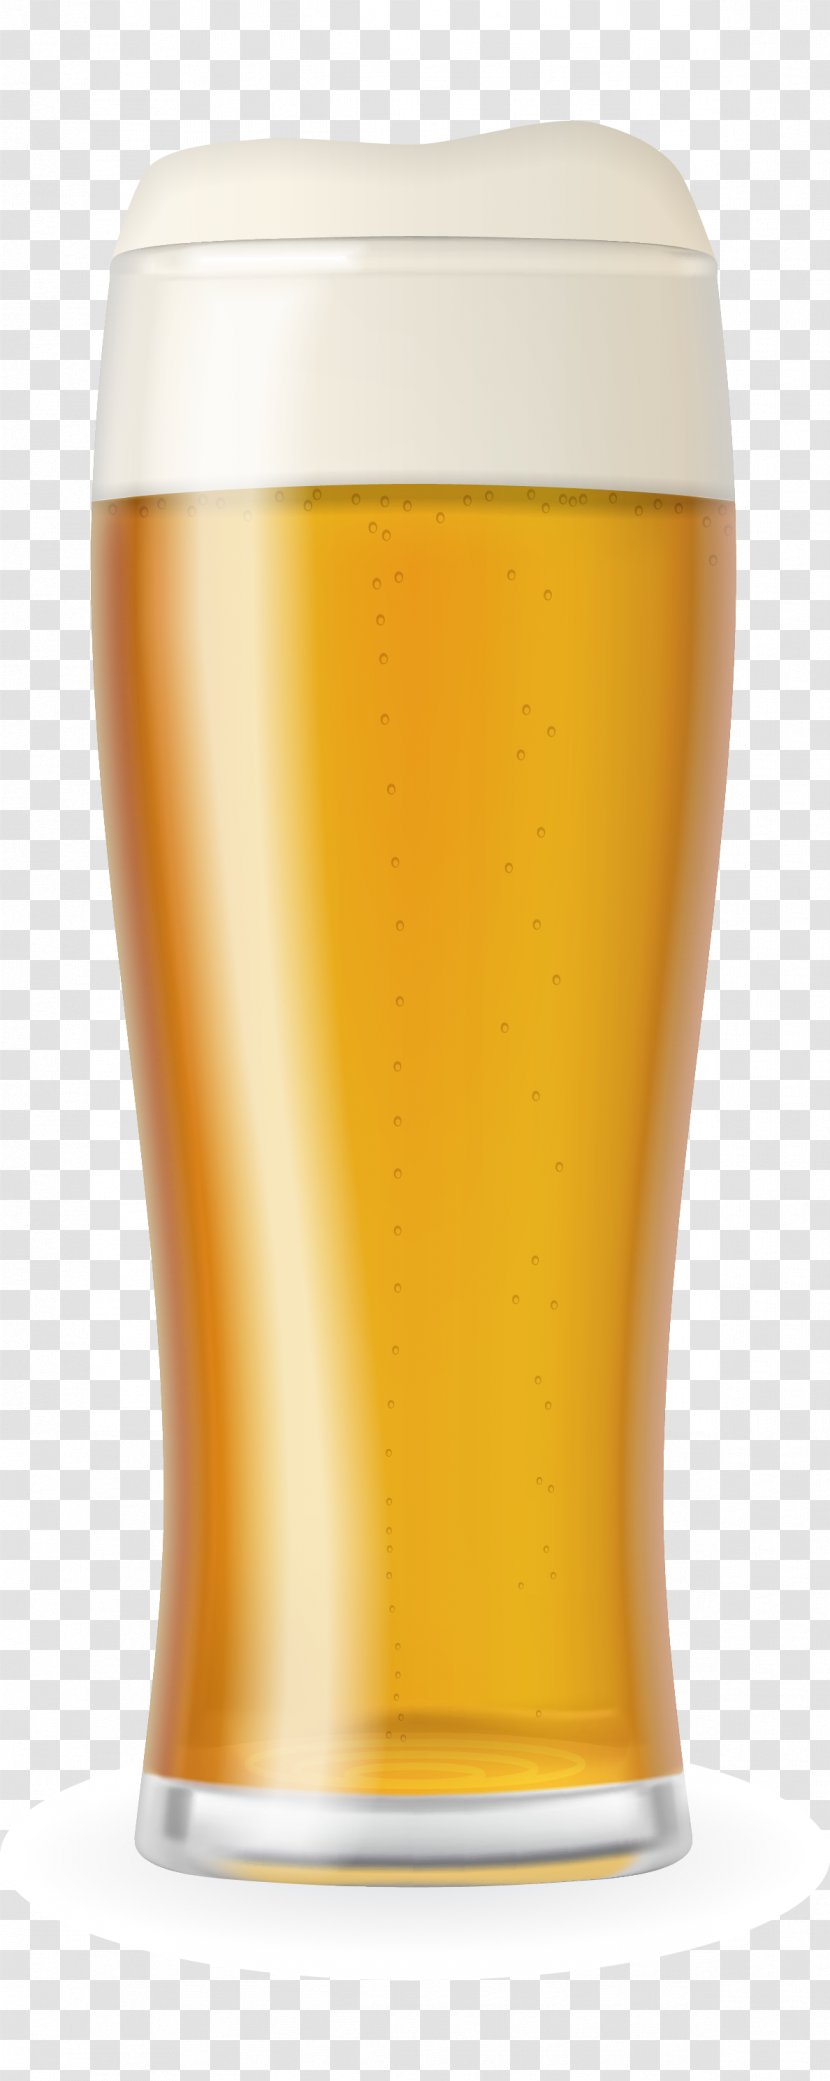 Wheat Beer Pint Glass Glasses Transparent PNG